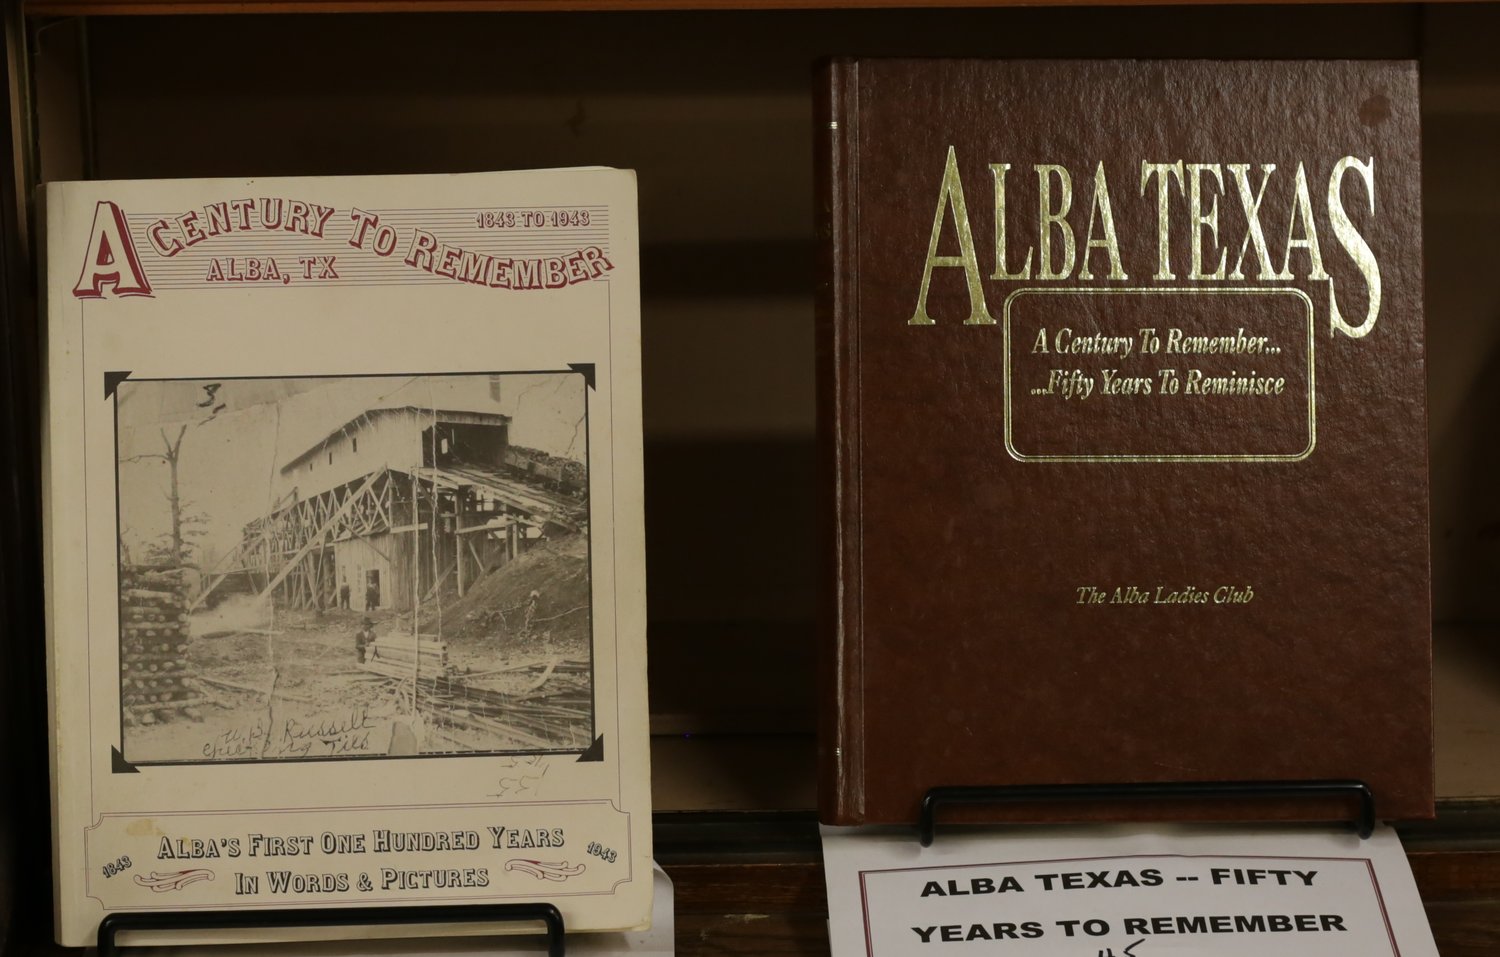 Further historical information is available at the Alba Museum.